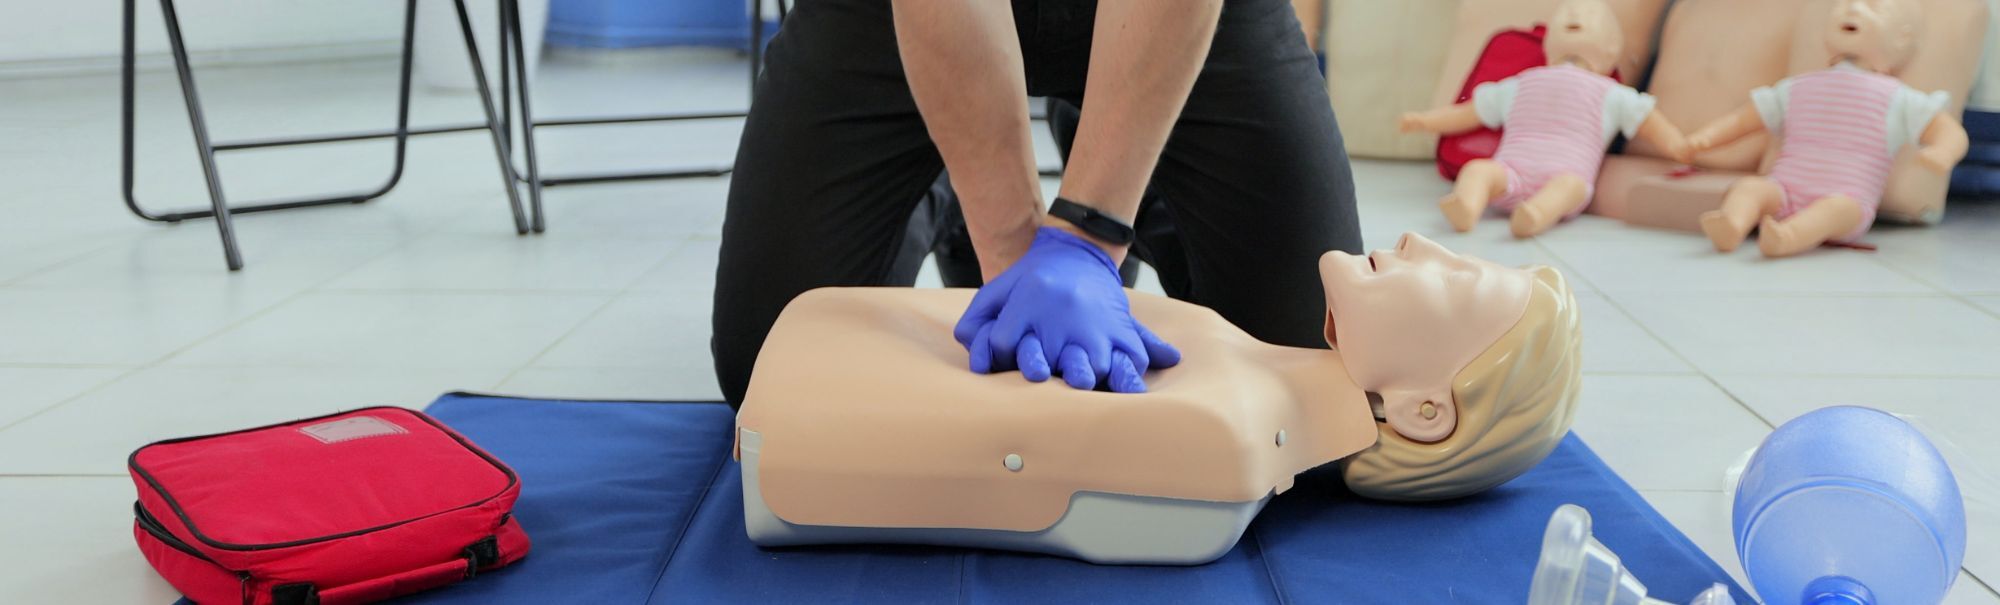 St. John Ambulance CPR BLS & AED - Recertification